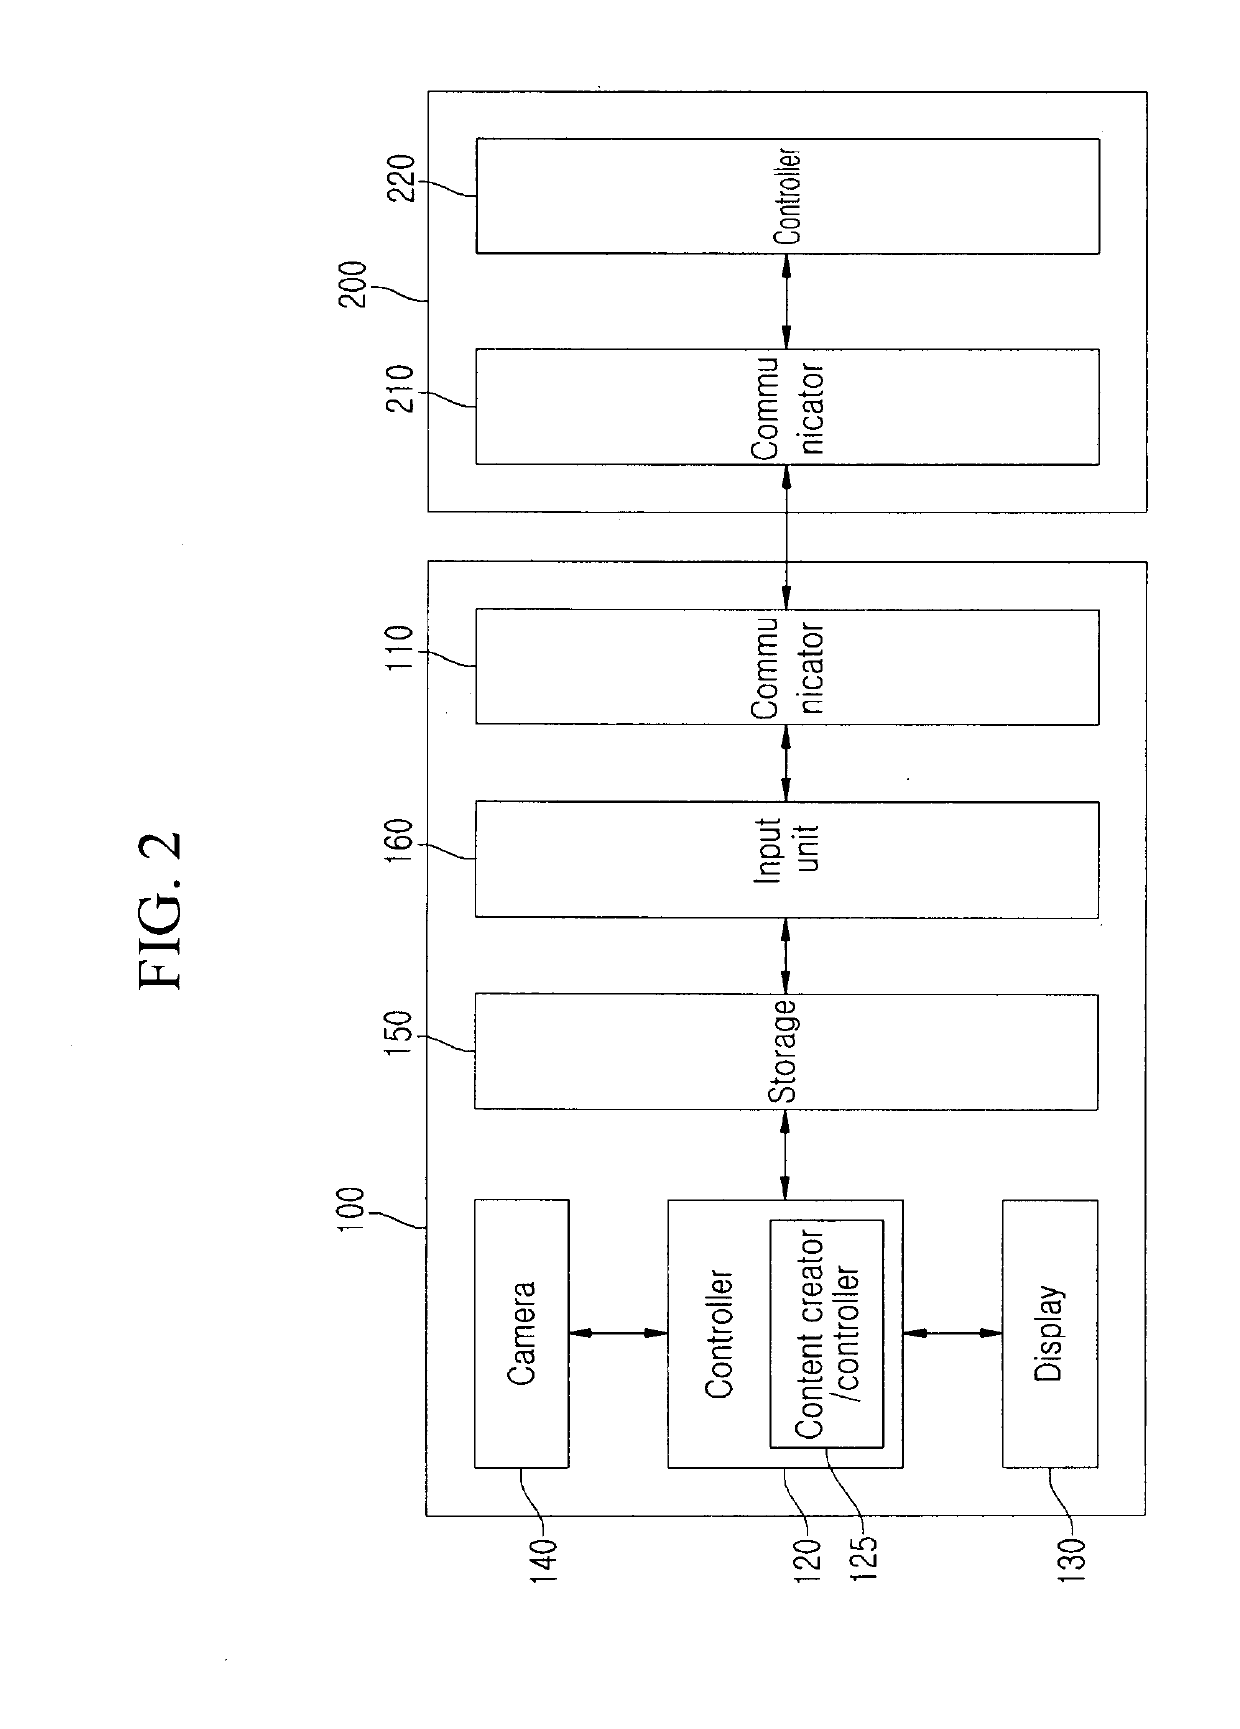 Method and apparatus for providing contents controlled or synthesized based on interaction of user